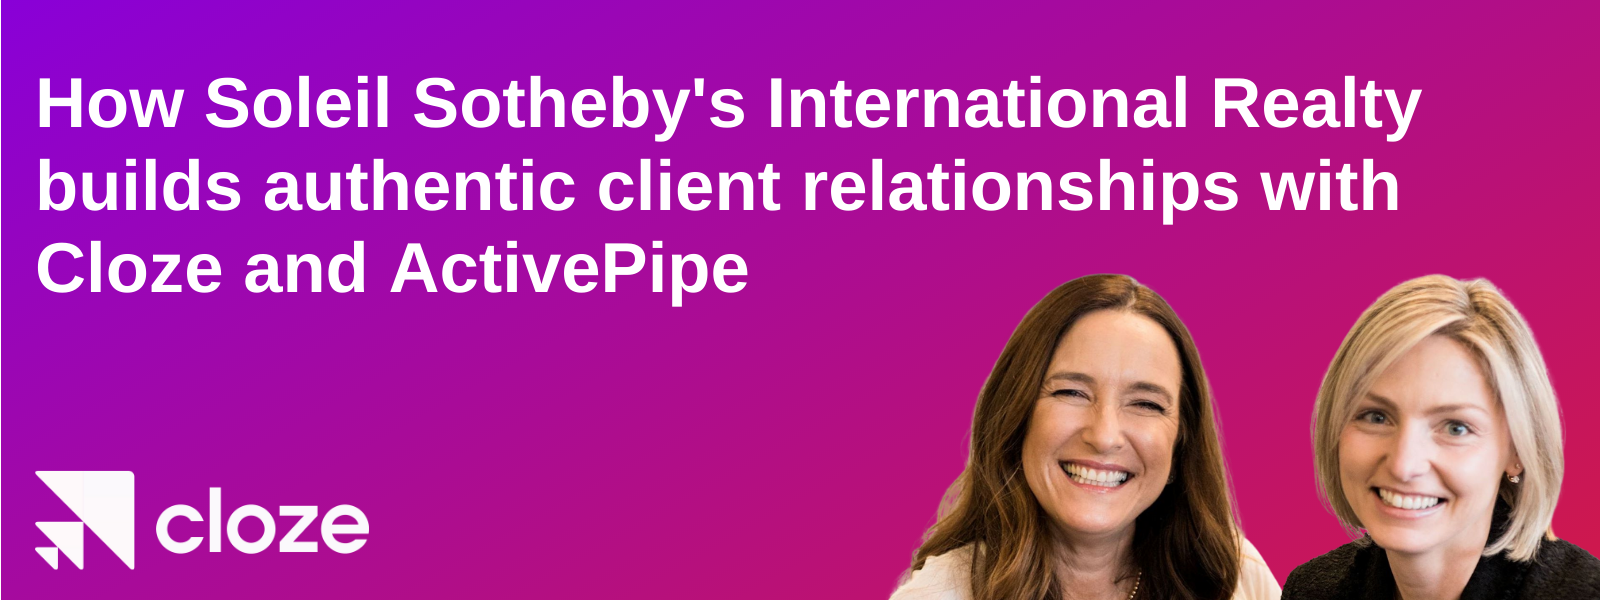 How Soleil Sotheby's International Realty builds authentic client relationships with Cloze and ActivePipe